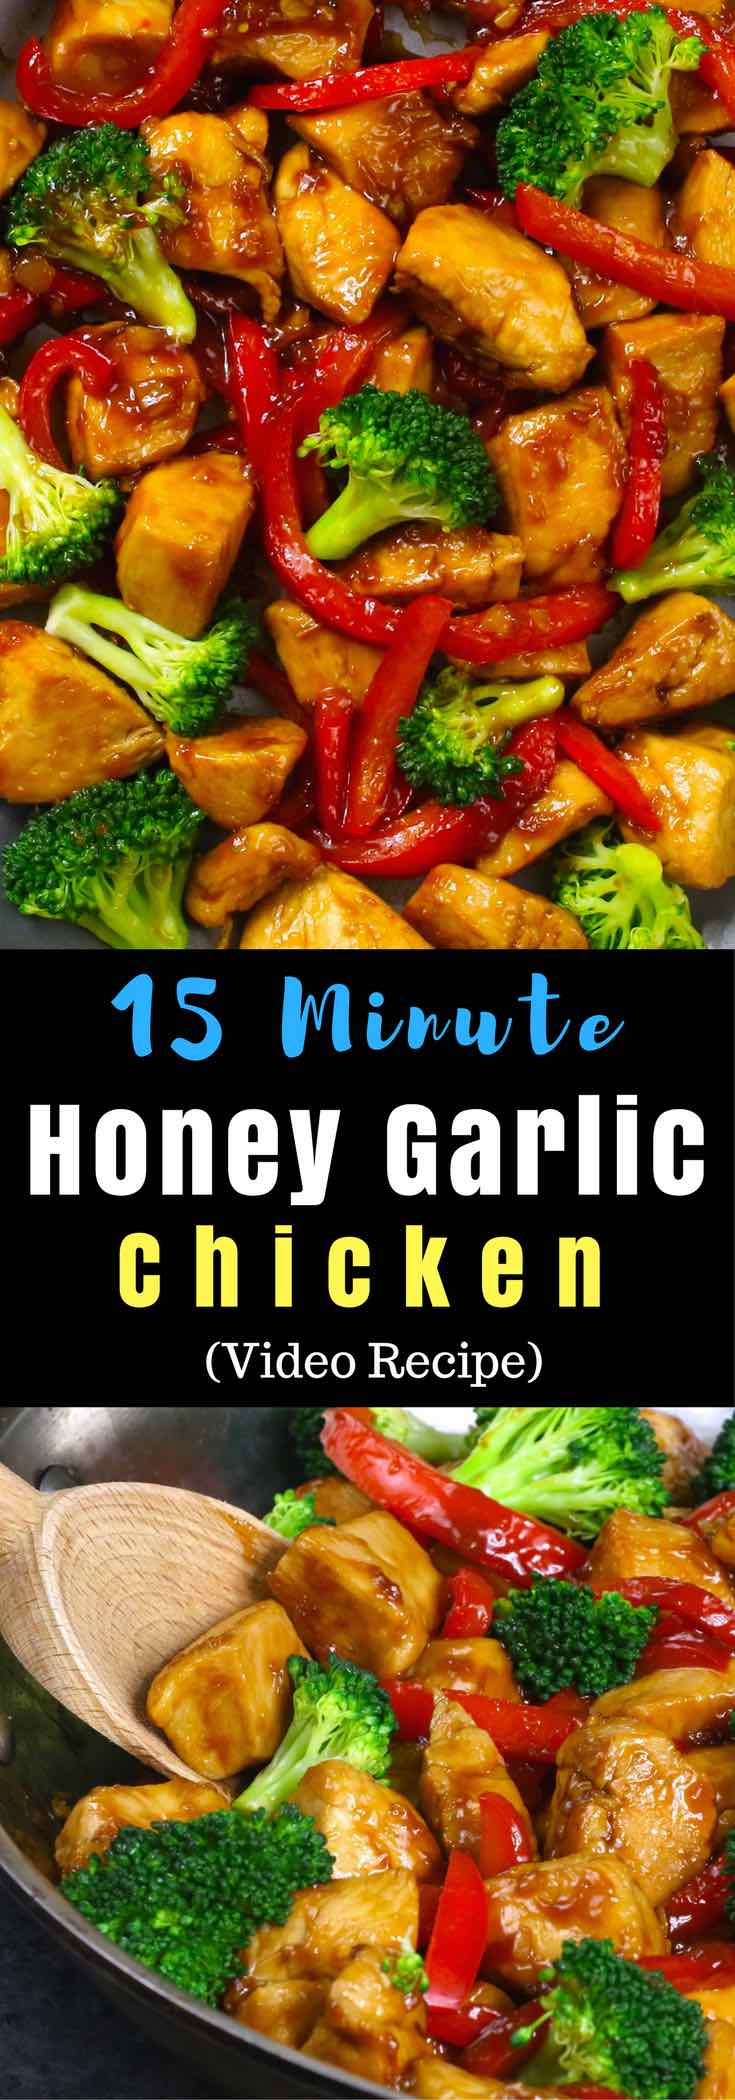 The easiest, most unbelievably delicious Honey Garlic Chicken recipe. And it’ll be on your dinner table in just 15 minutes. Succulent chicken cooked in honey, garlic and soy sauce mix, seared in frying pan with vegetables. Ready in 15 minutes! Quick and easy dinner recipe. Video recipe.